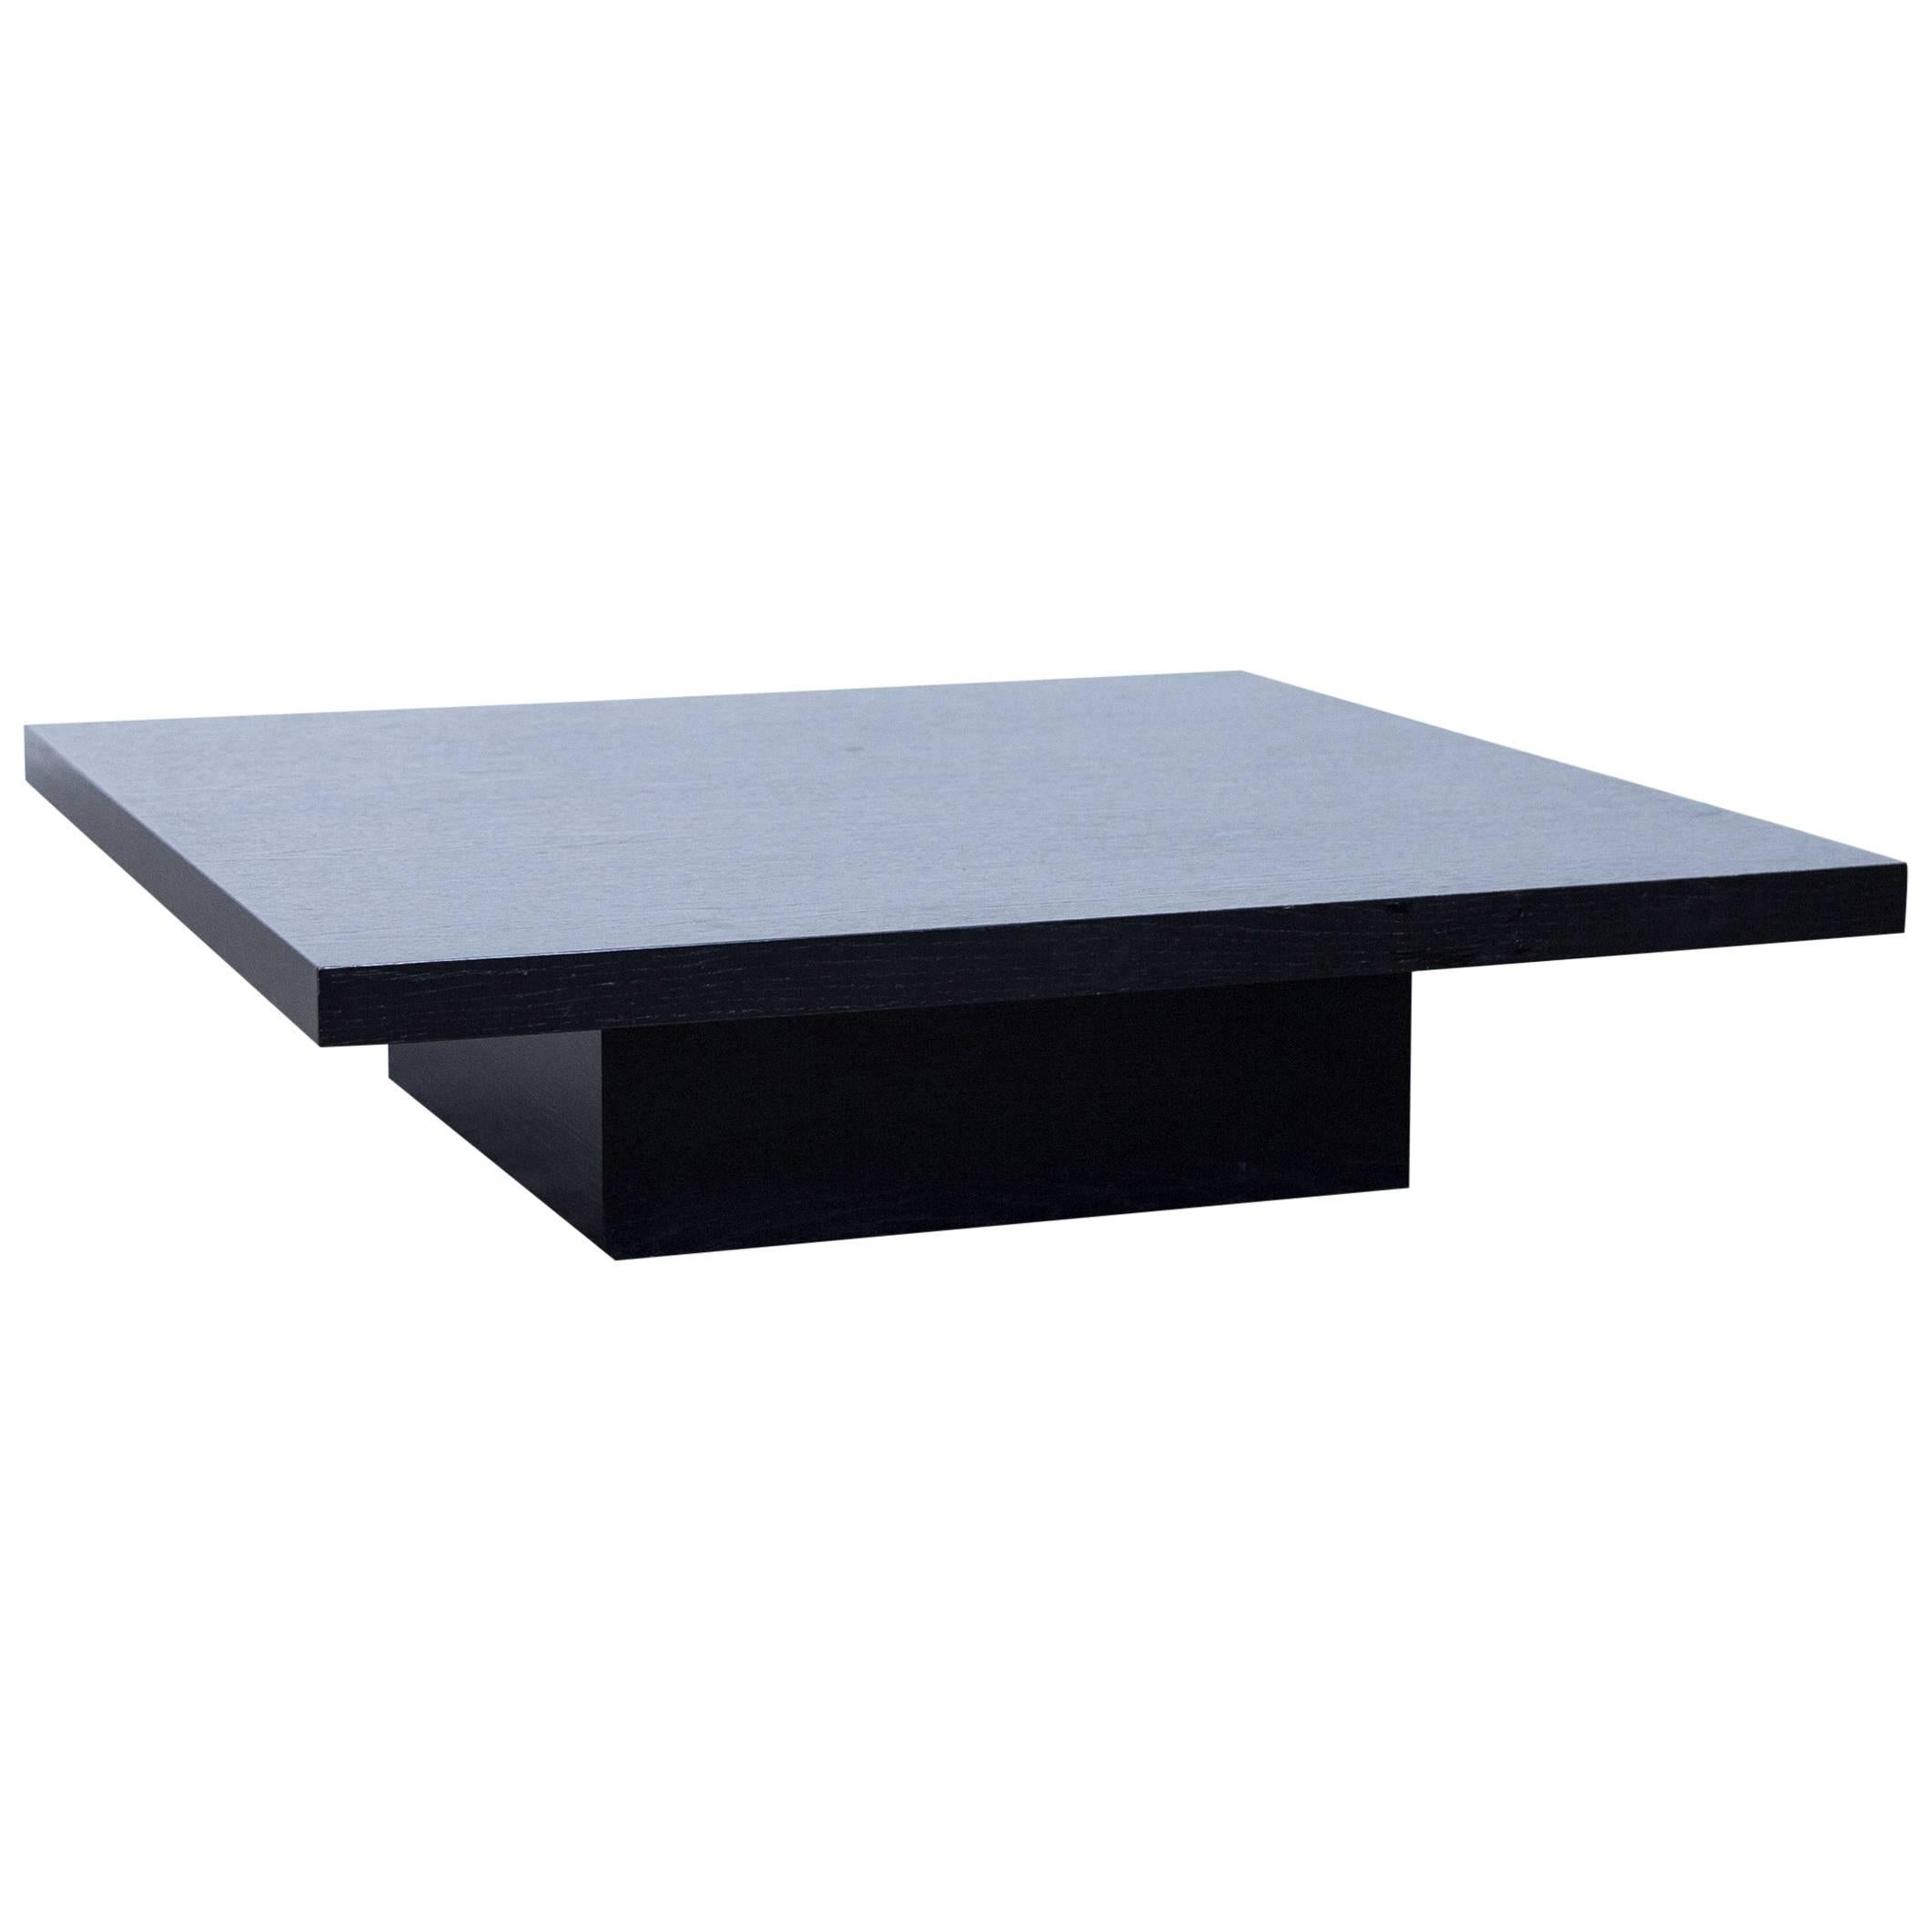 Designer Table Wood Black Couch Sofa Table Modern For Sale